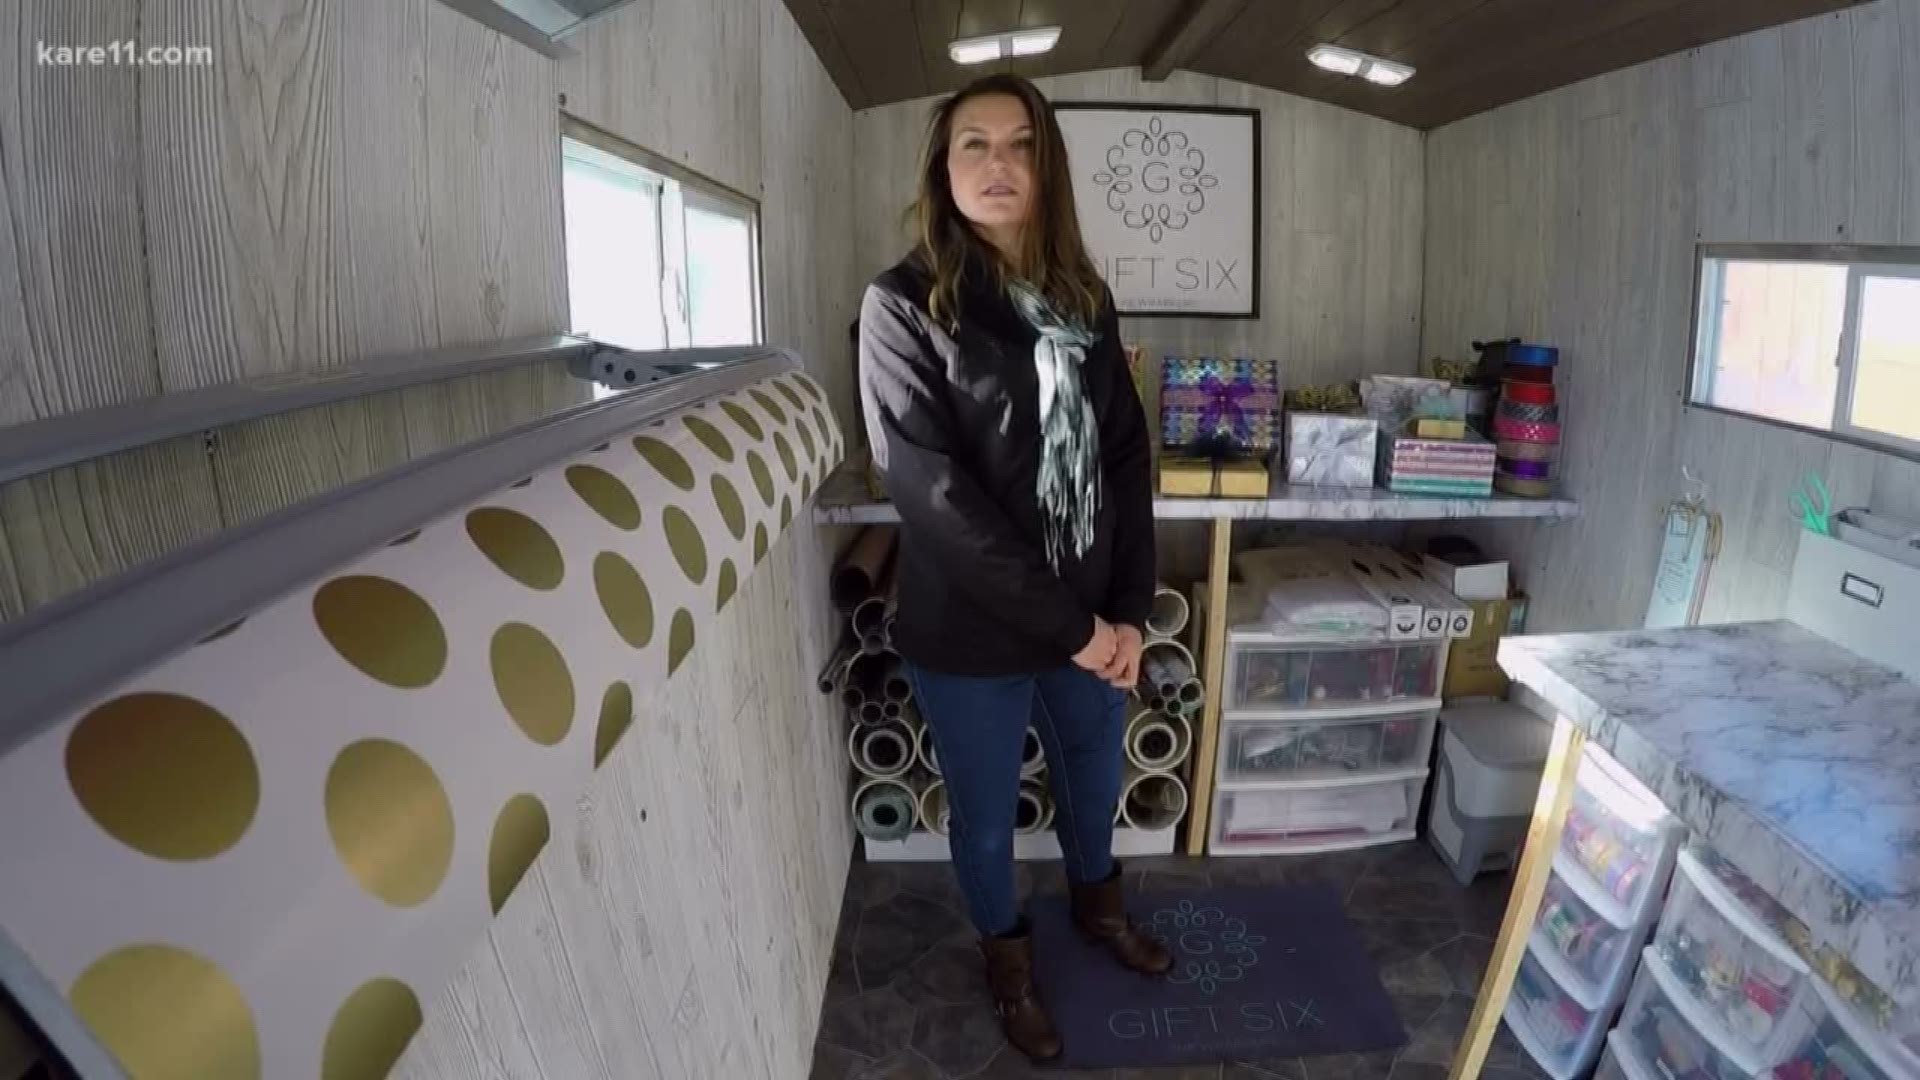 Andrea Loth's office is 6 feet wide, 12 feet long and mobile. Known as "The Wrappery," Loth's office is an ice fishing trailer that's been turned into a gift wrapping-mobile. https://kare11.tv/2ORR1hF